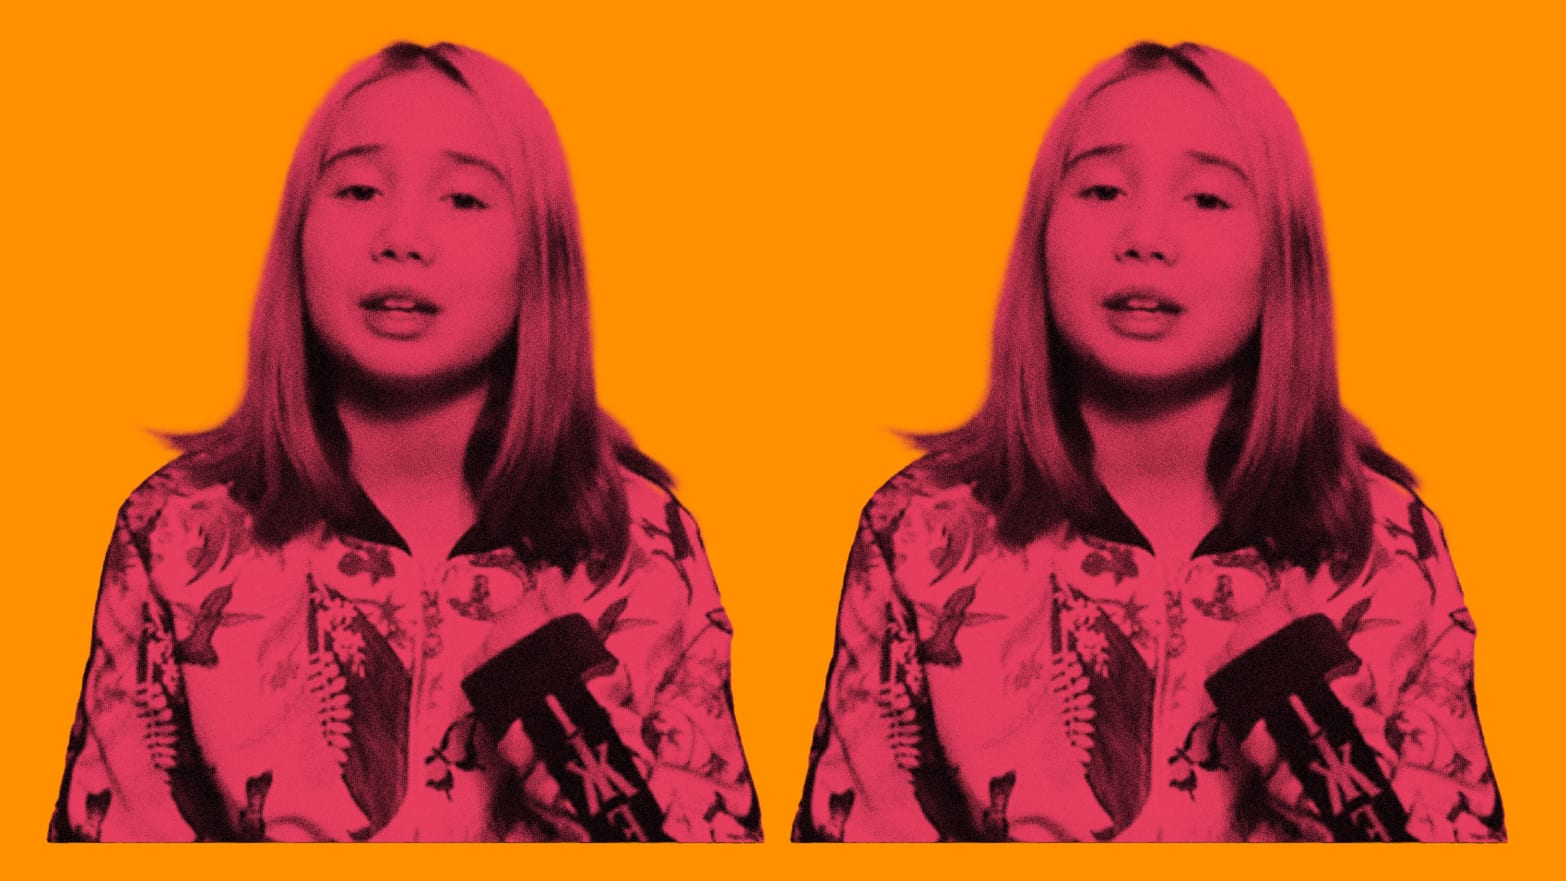 I'm alive': teen rapper Lil Tay releases statement after mysterious death  report, Music